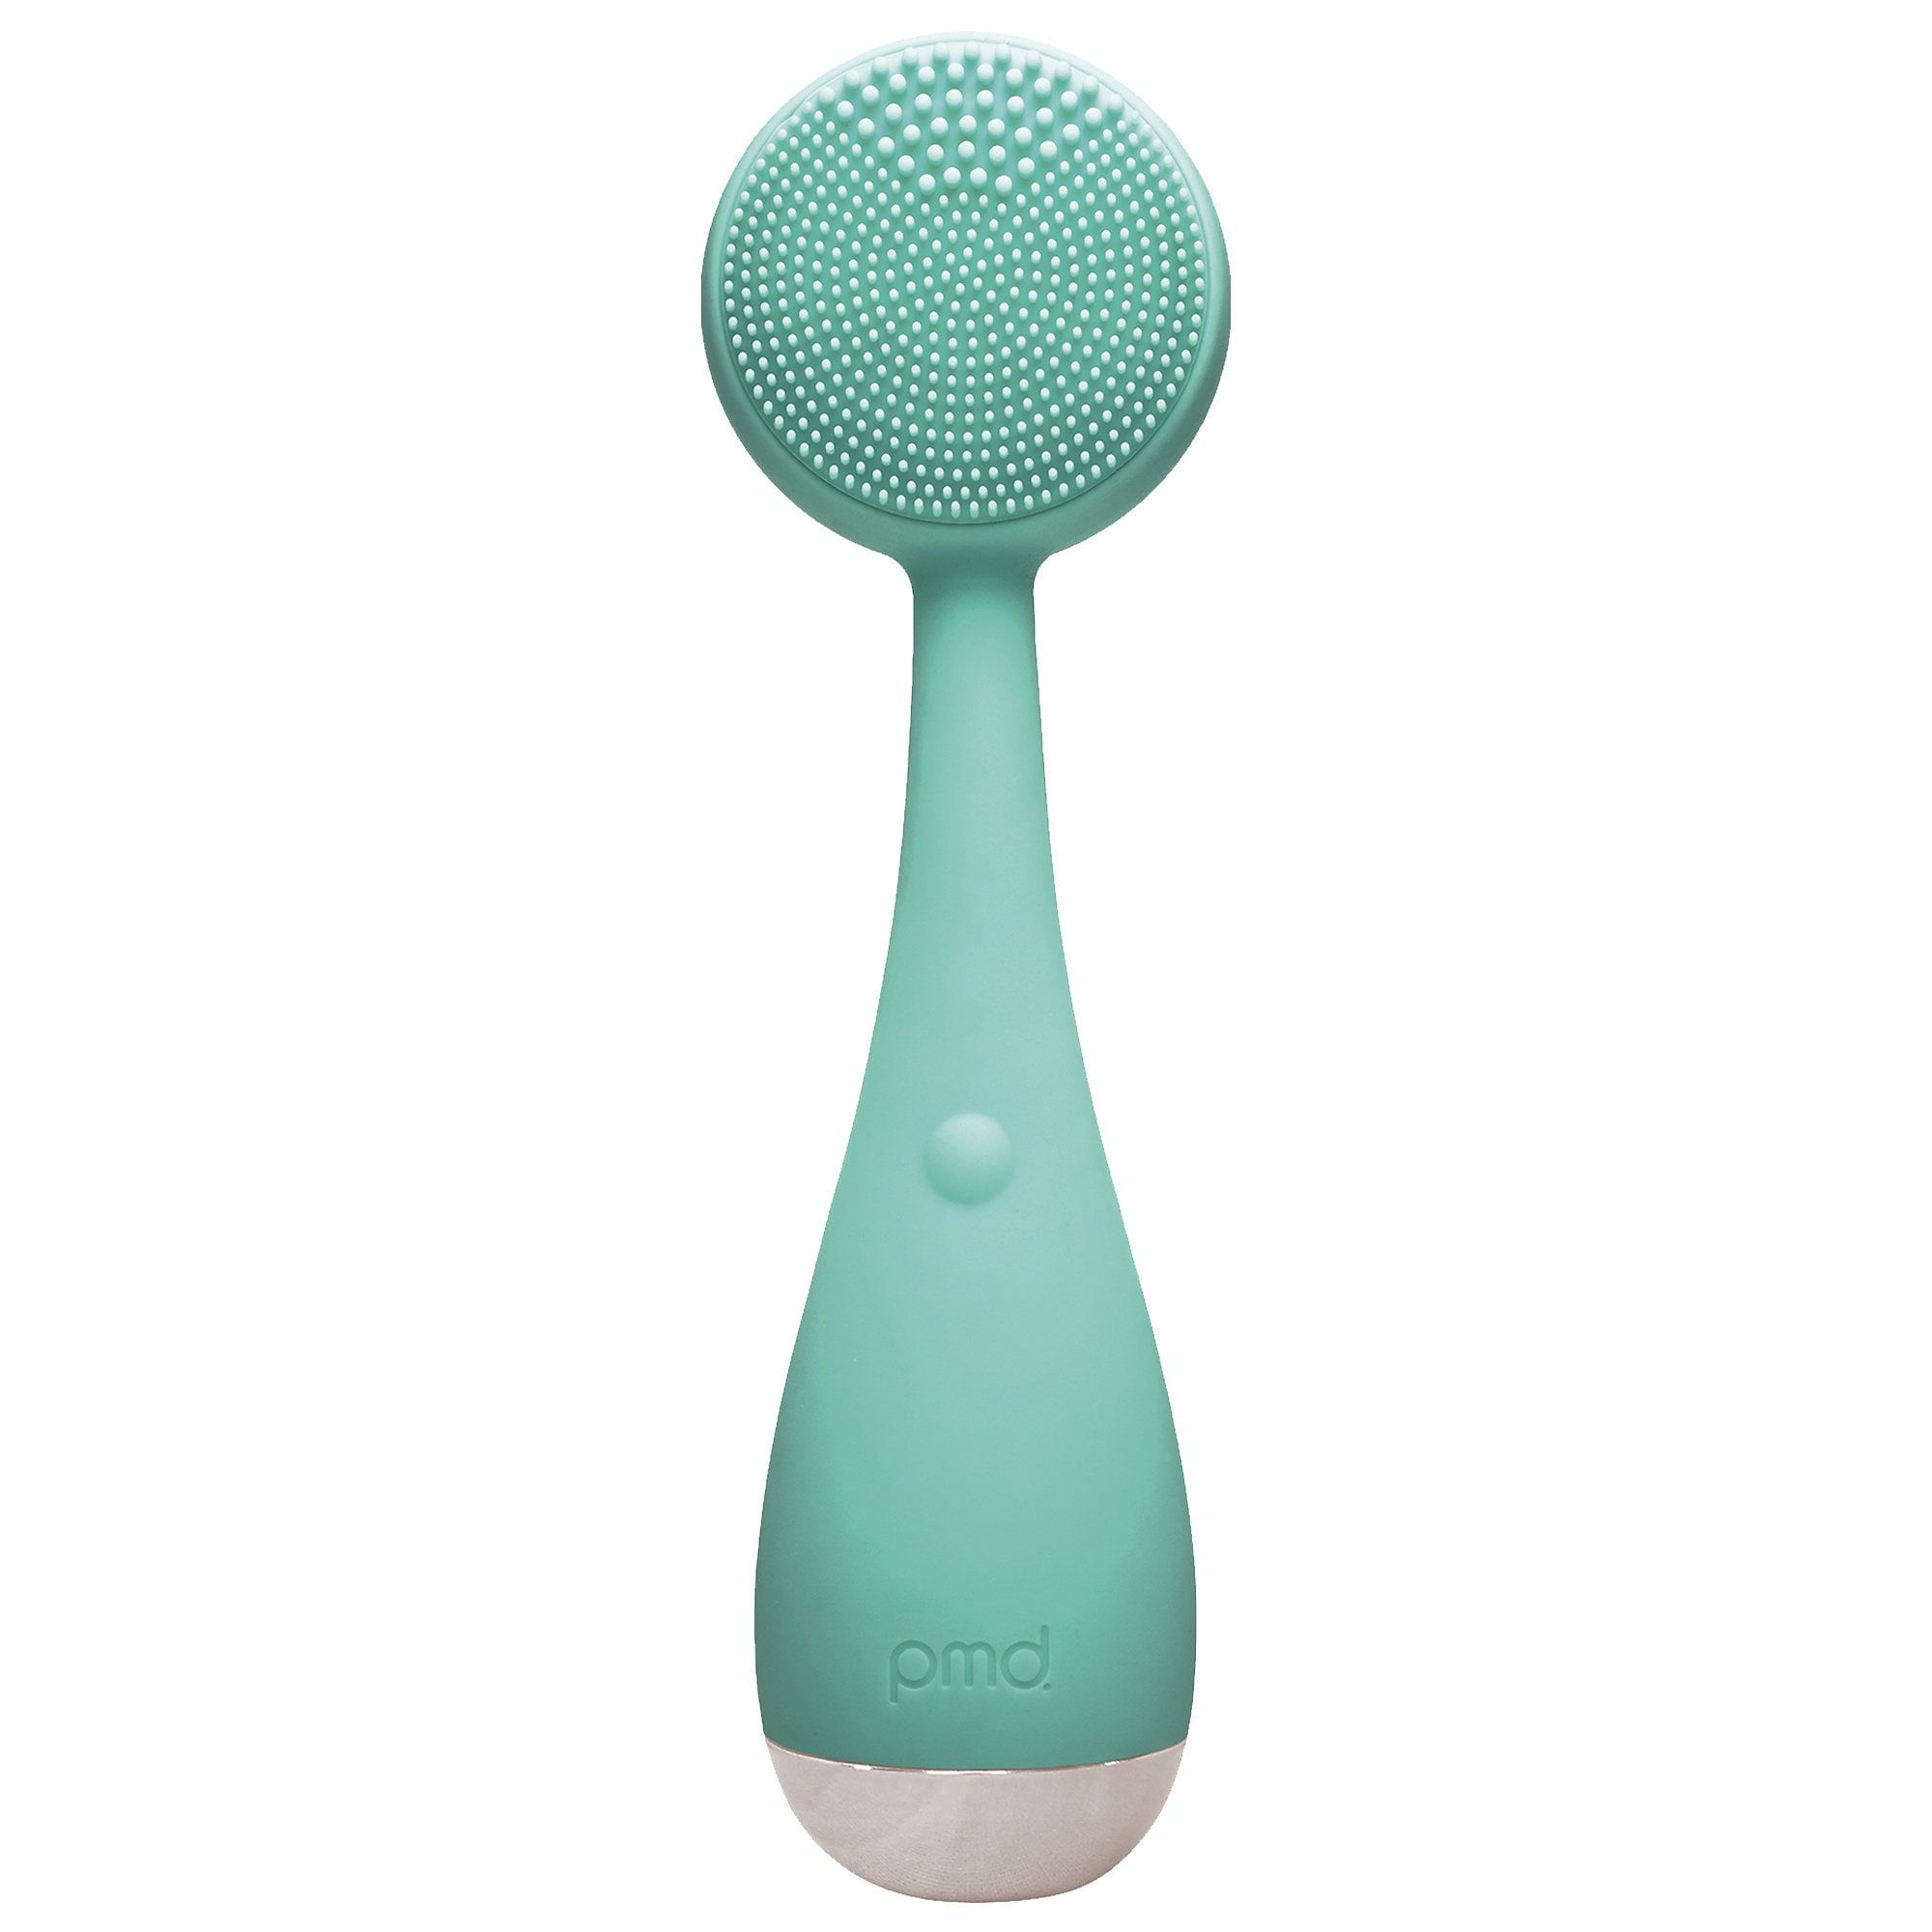 Clean Smart Facial Cleansing Device